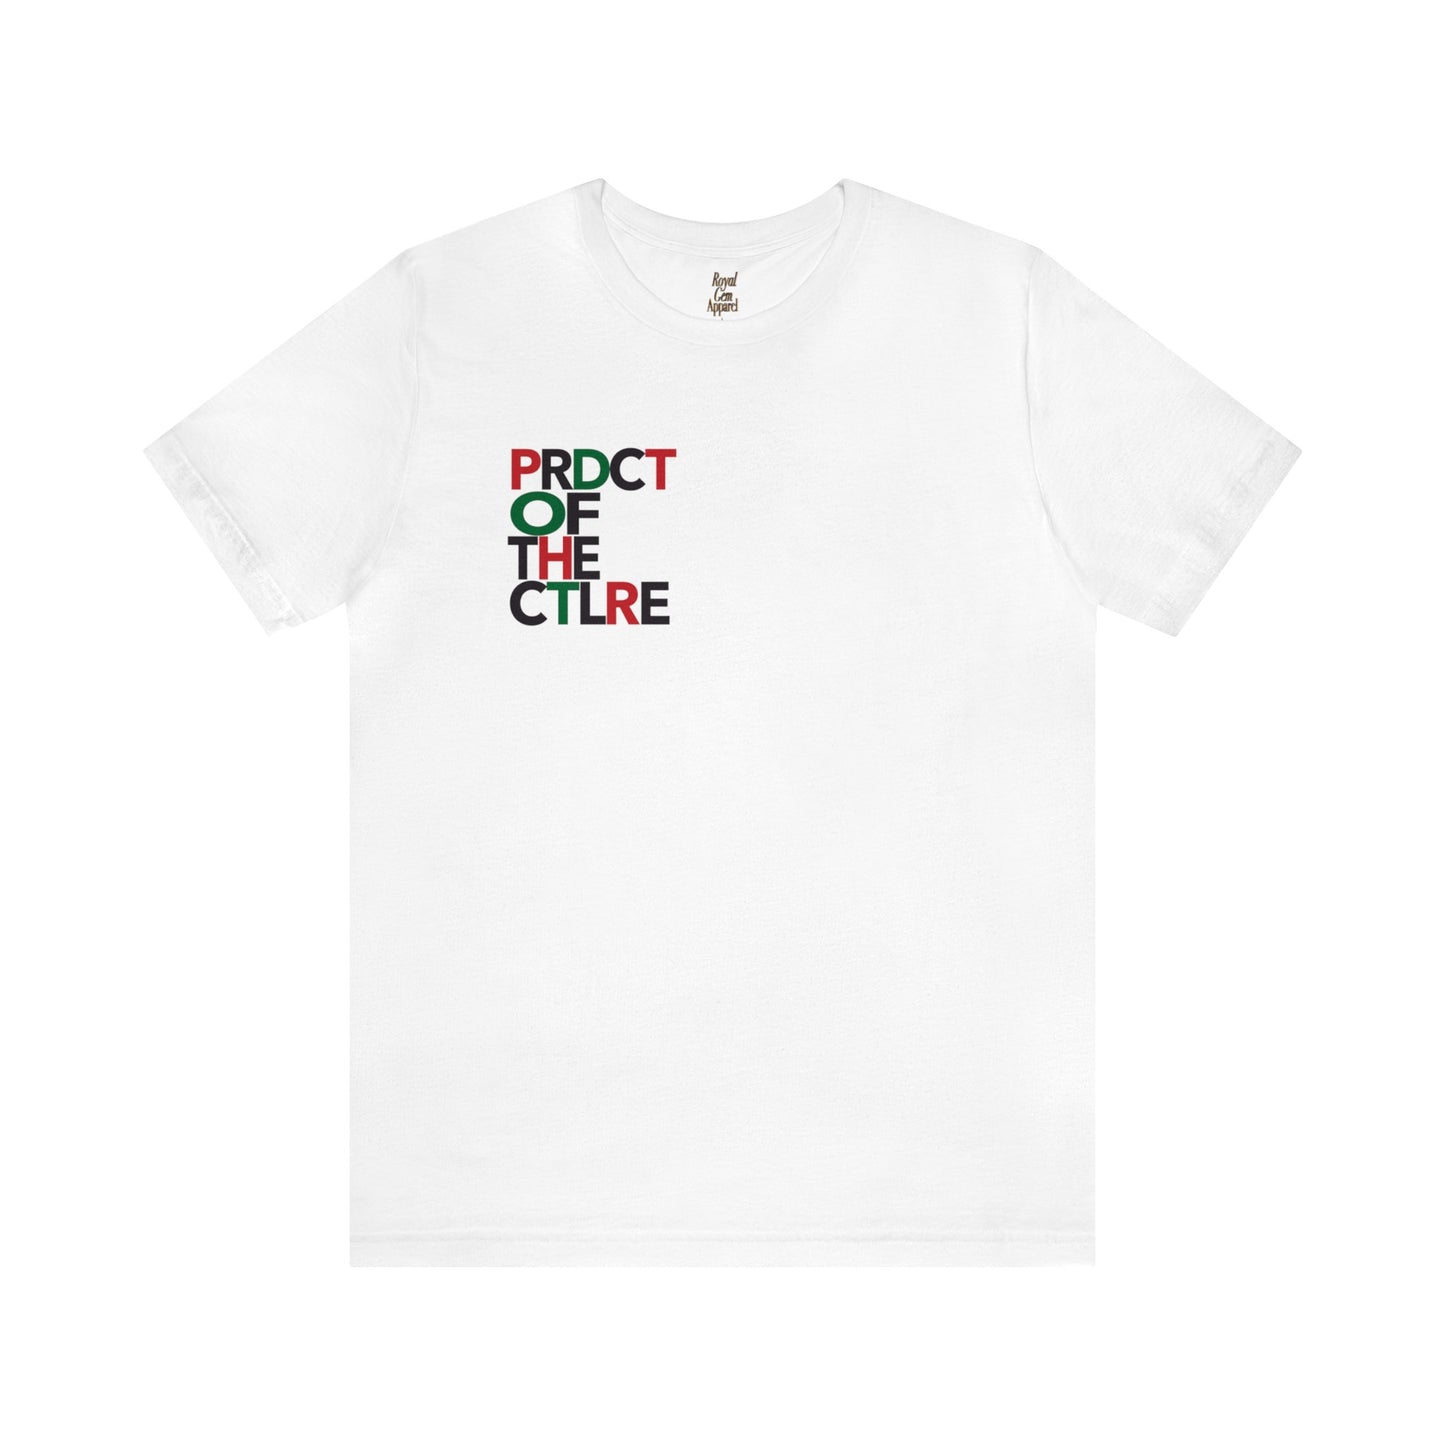 "Product of the Culture" Tee